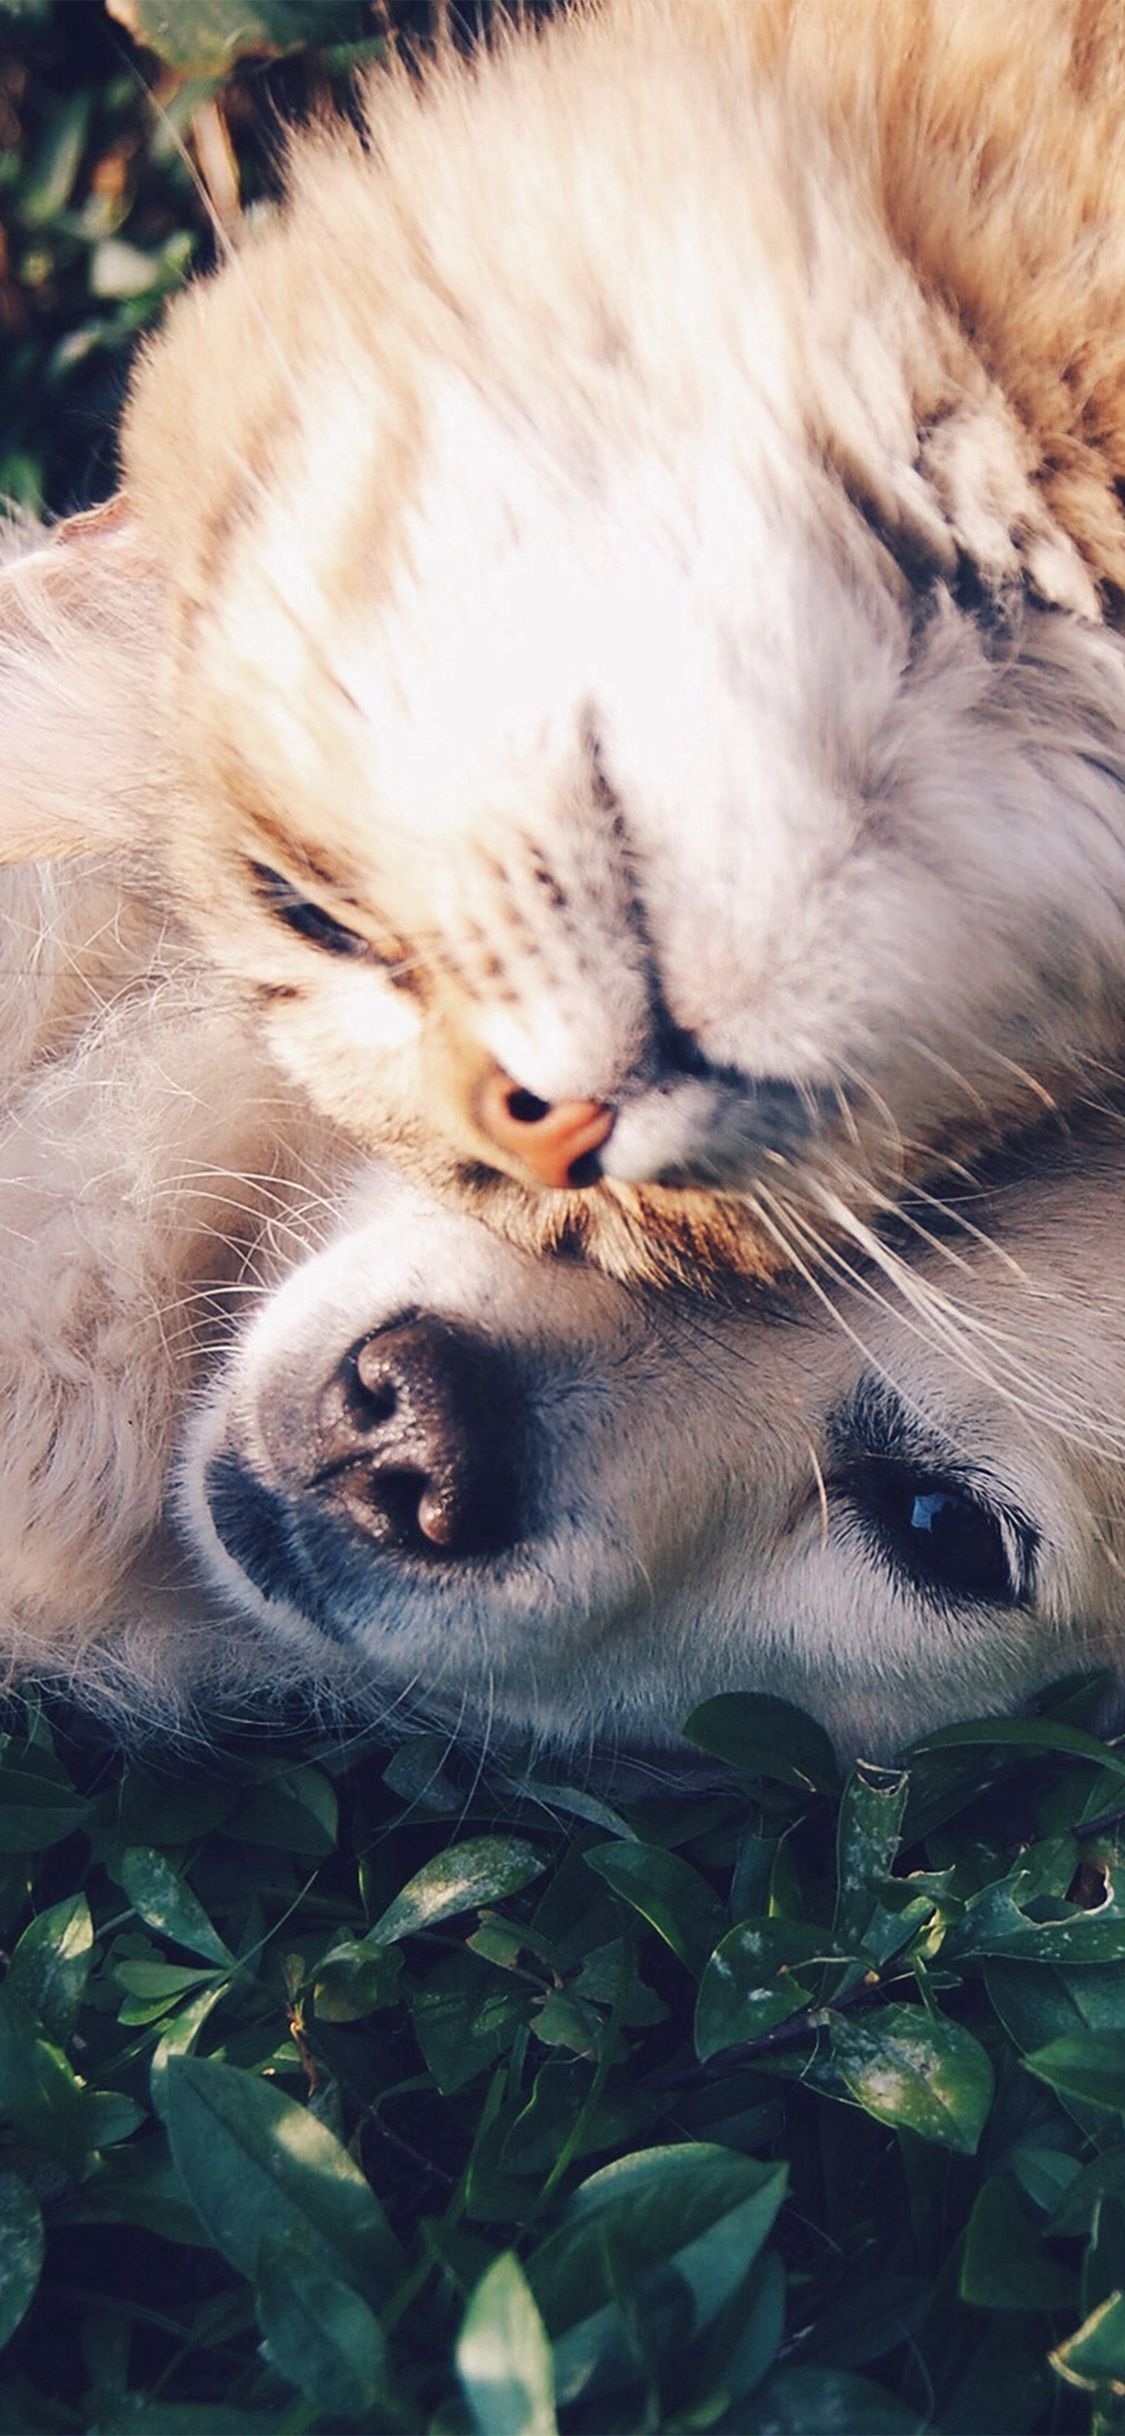 Cat And Dog Animal Love Nature Pure #iPhone #X #wallpaper. Cat training, Cats, Pets